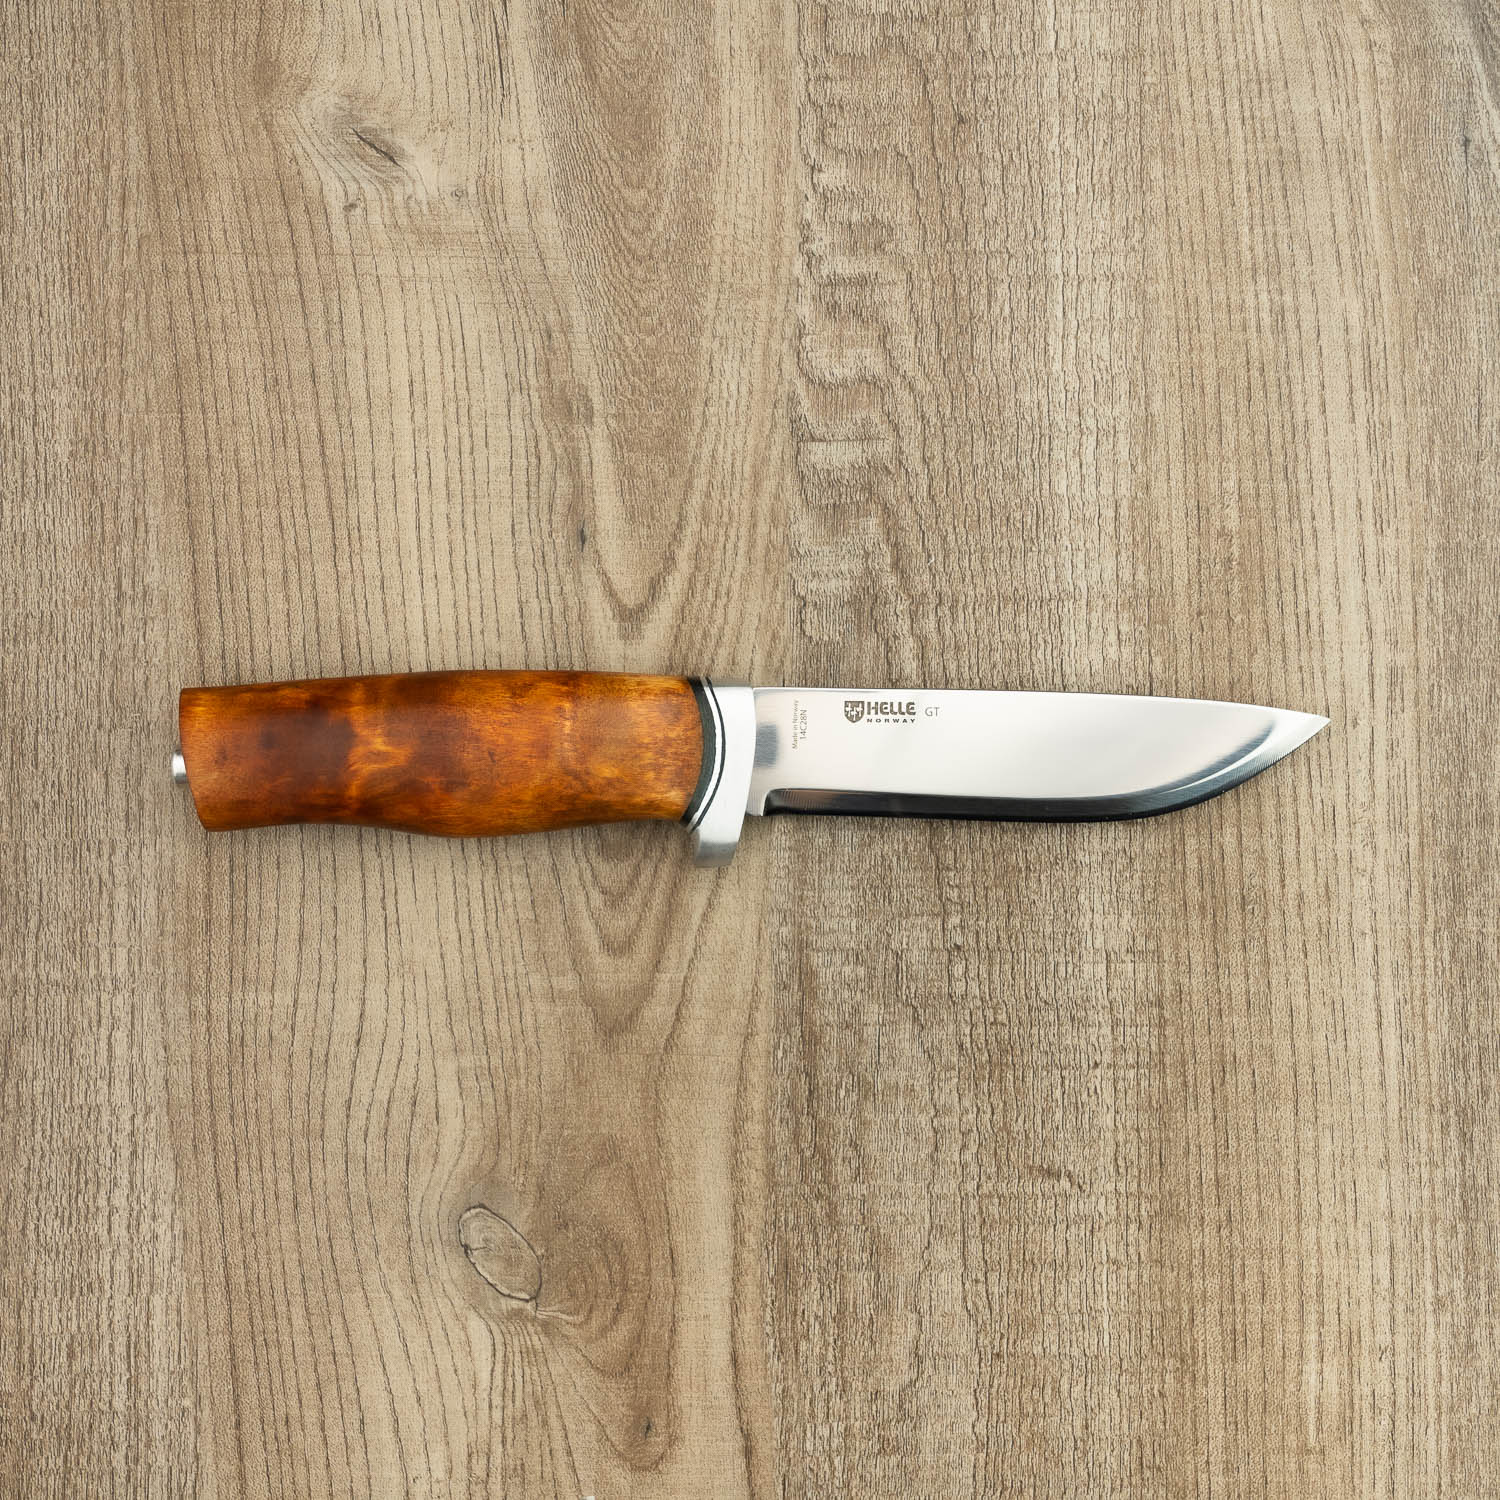 Helle Knives GT 123mm Hunting Knife from Helle